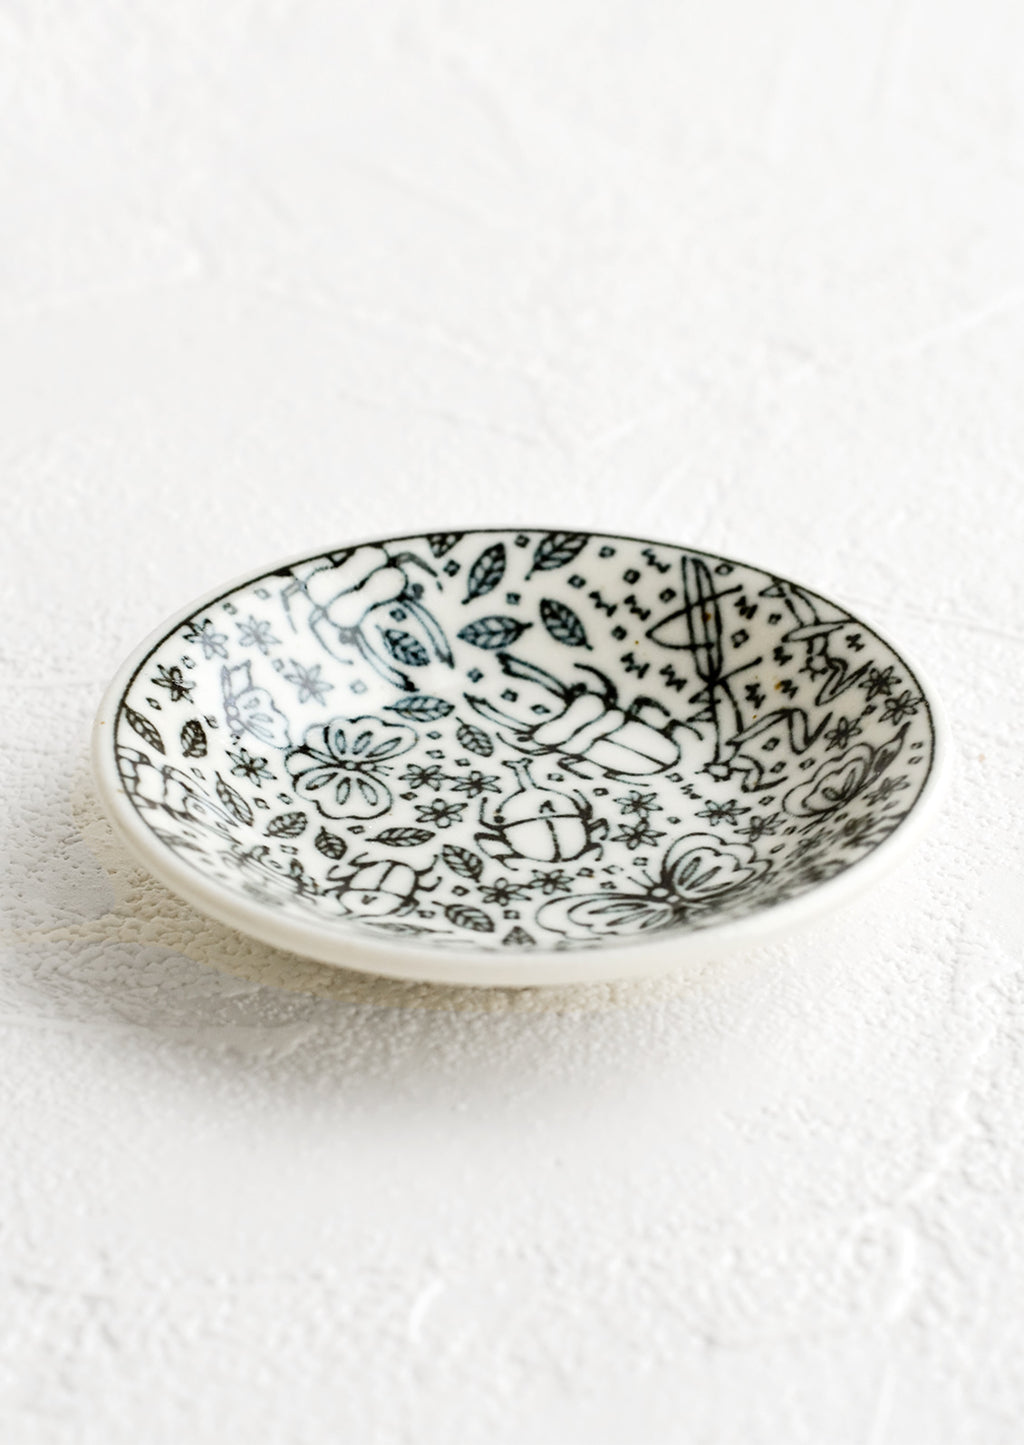 2: A round ceramic trinket dish in black and white with insect print.